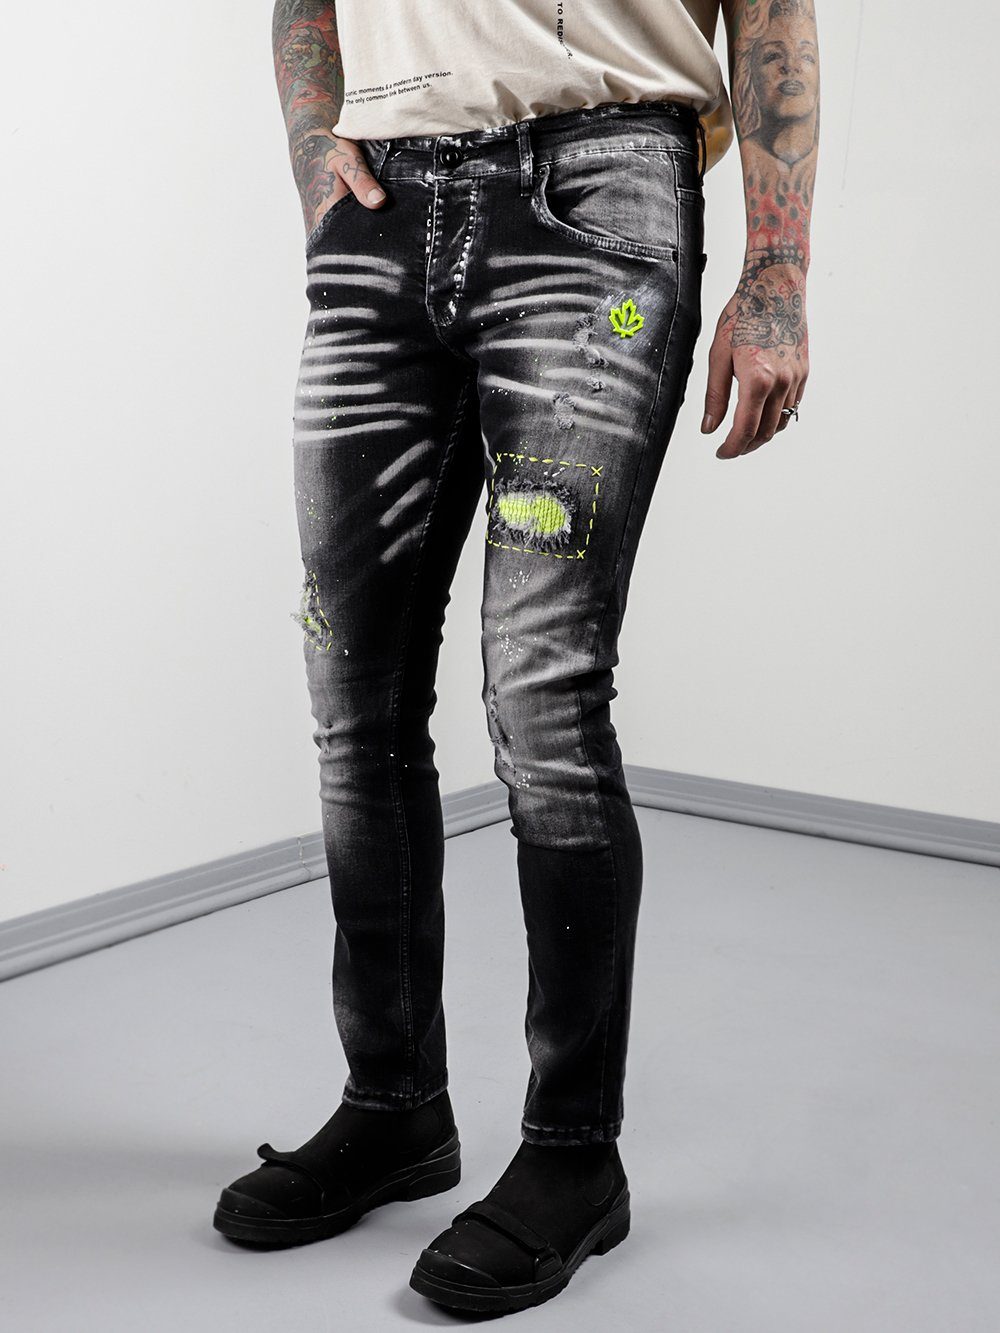 A man wearing NEON TALK and ripped jeans is standing in front of a white wall.